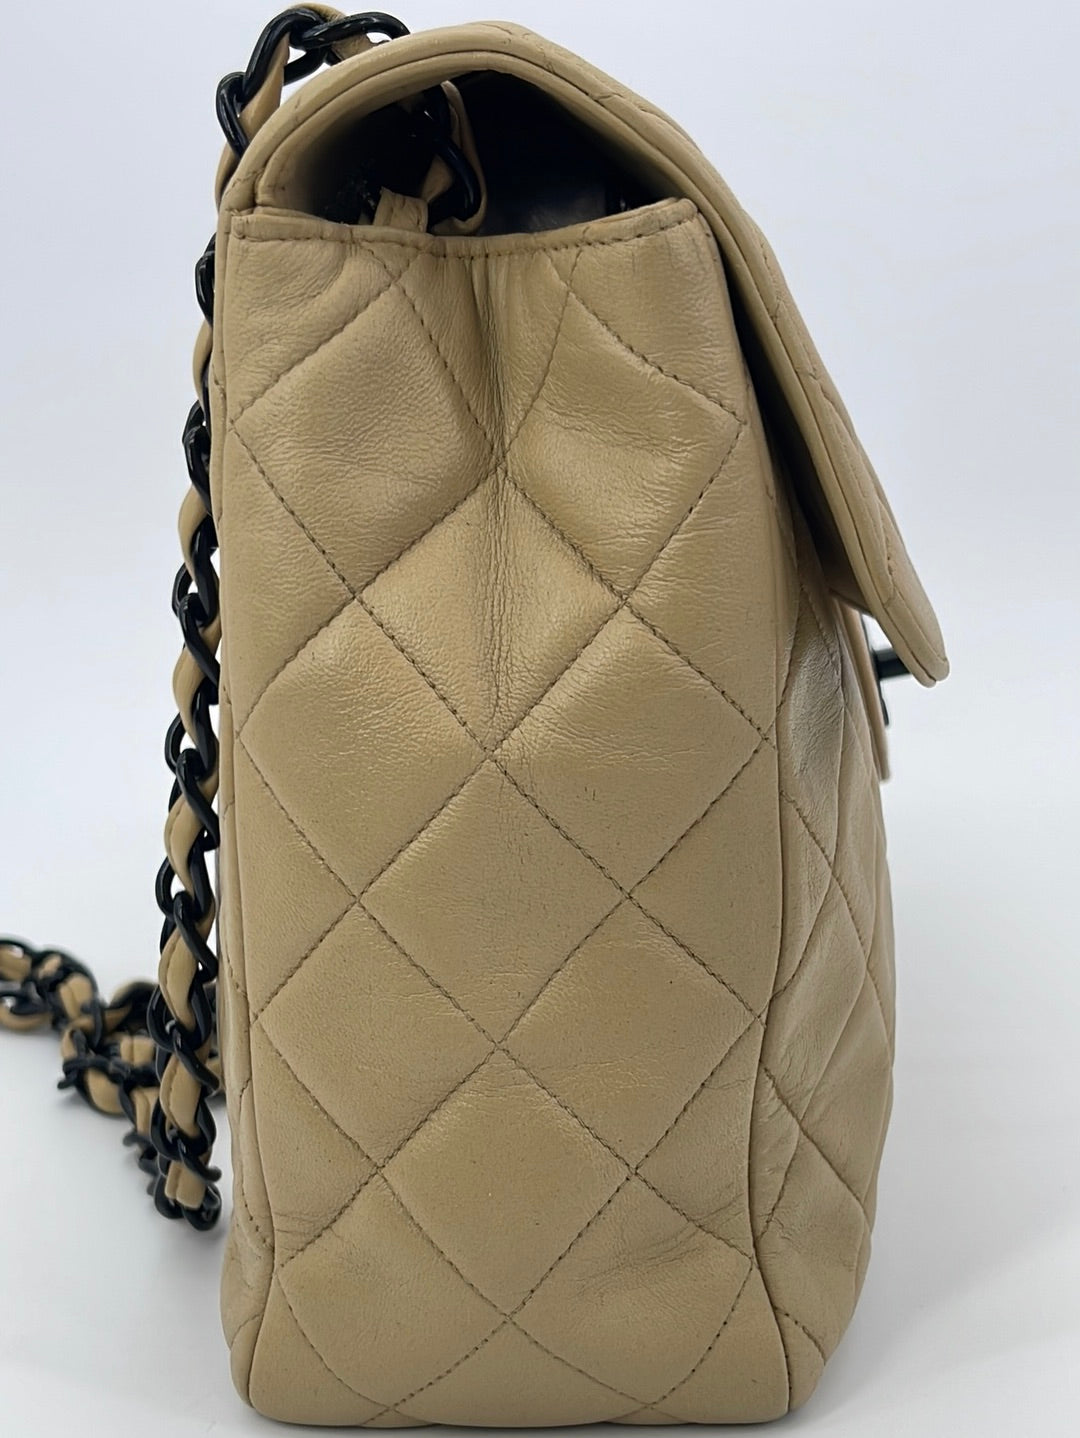 CHANEL Beige Quilted Lambskin Vintage Mini Classic Single Flap Bag